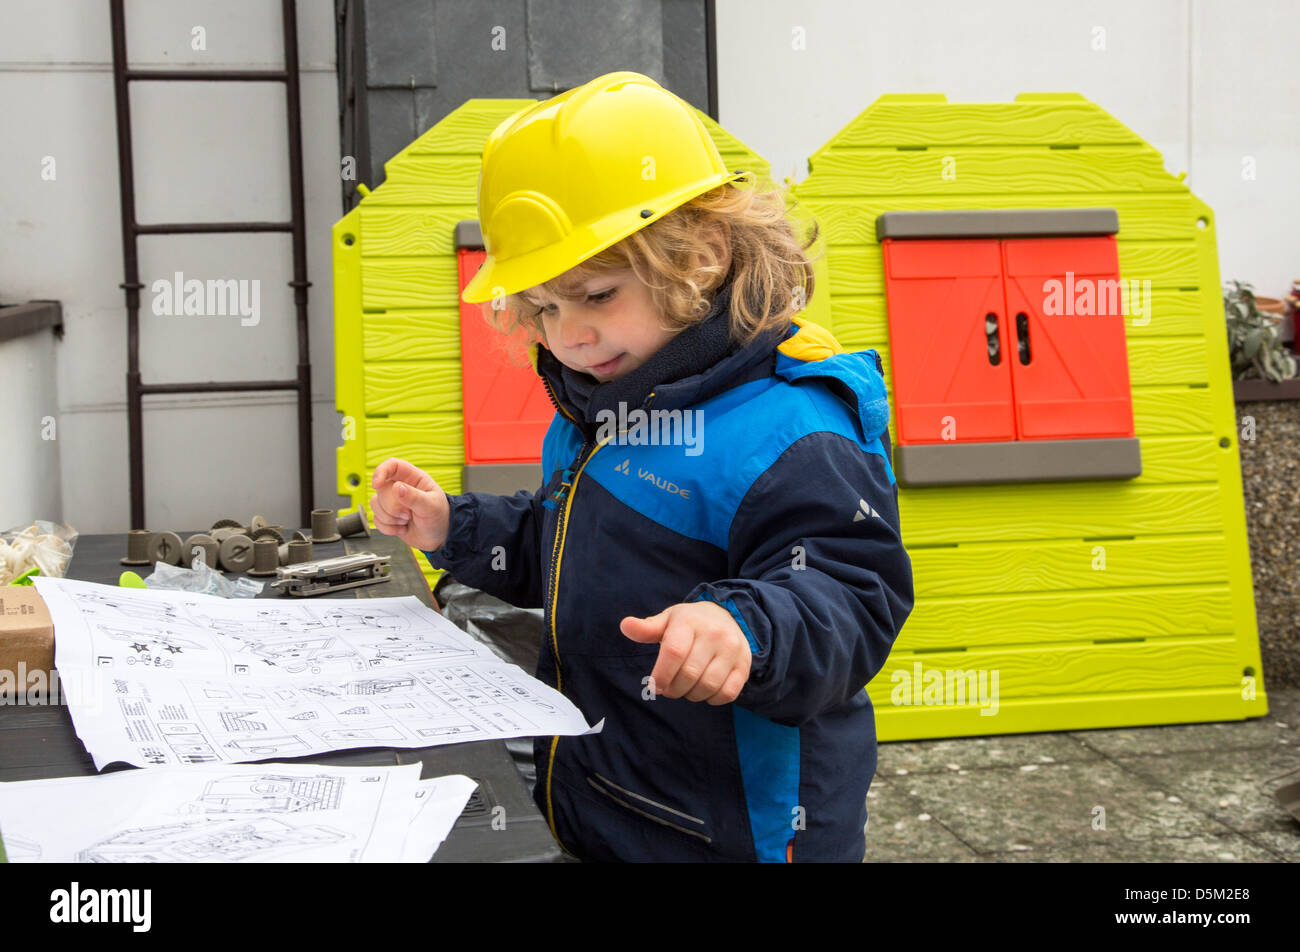 3 years old boy is playing at home. Assembling at toy house, wears a toy hard hat. Looks like an architect. Stock Photo